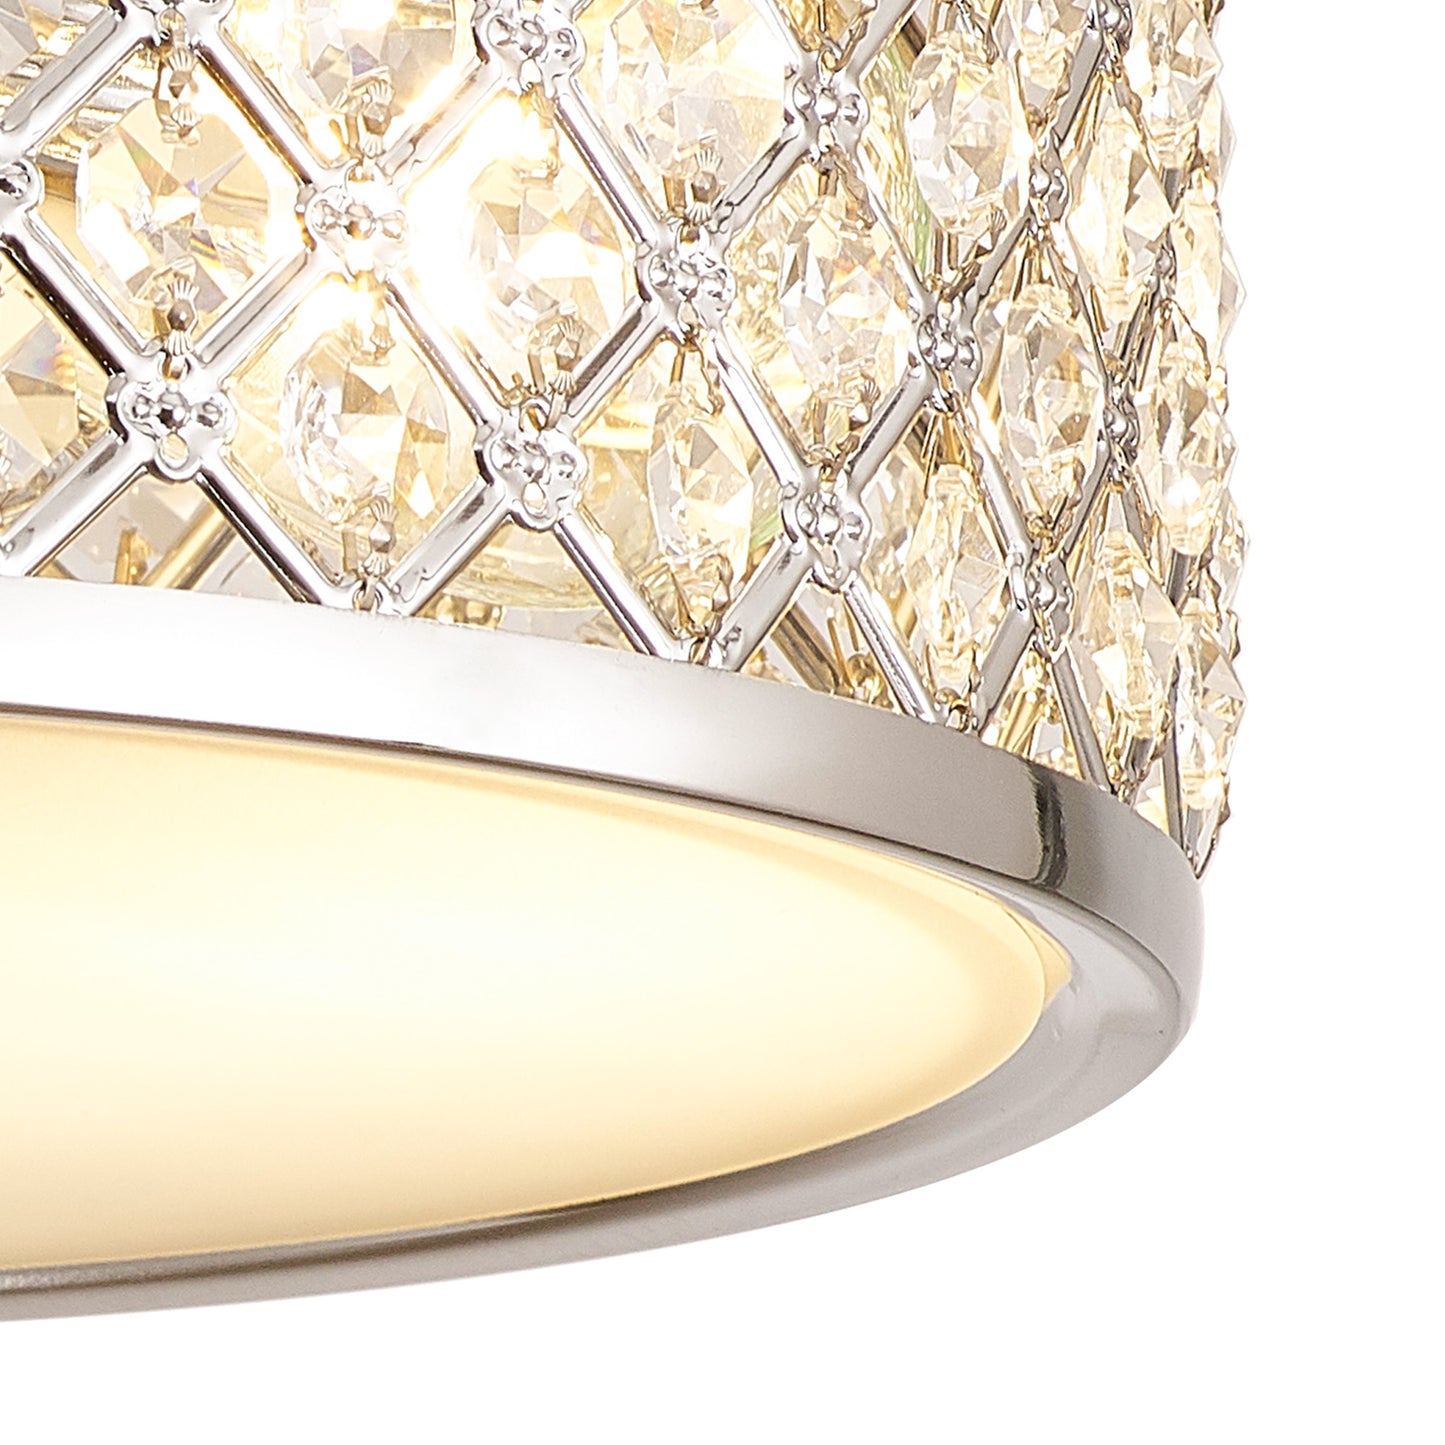 Sasha Flush Ceiling Light with Crystal Panels and Glass Diffuser